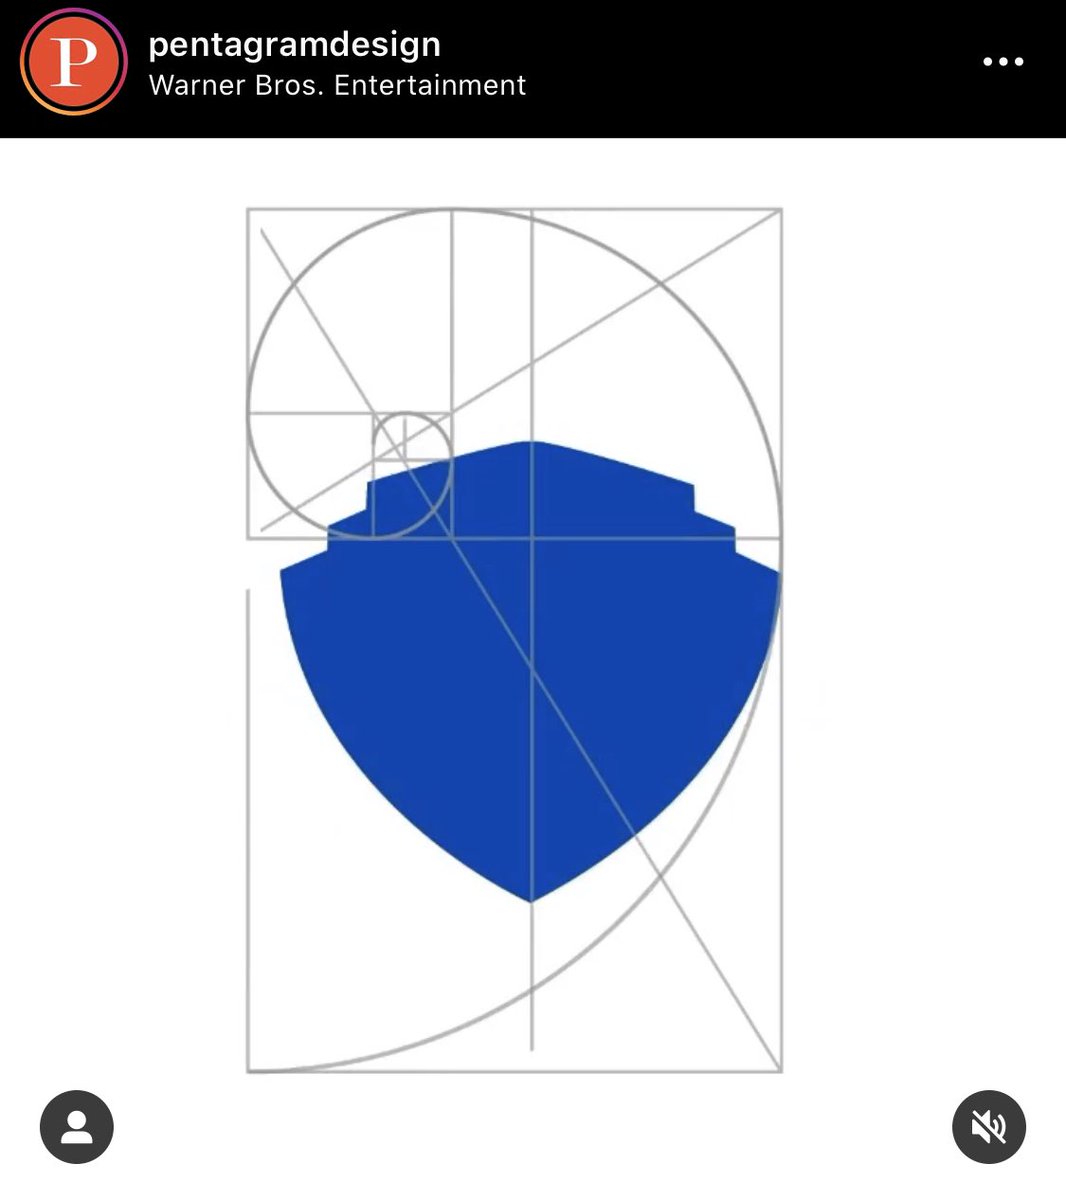 Gavin Potenza Wow Did Any One See This Pentagram Bringing Back The Golden Ratio For Wb So Smart